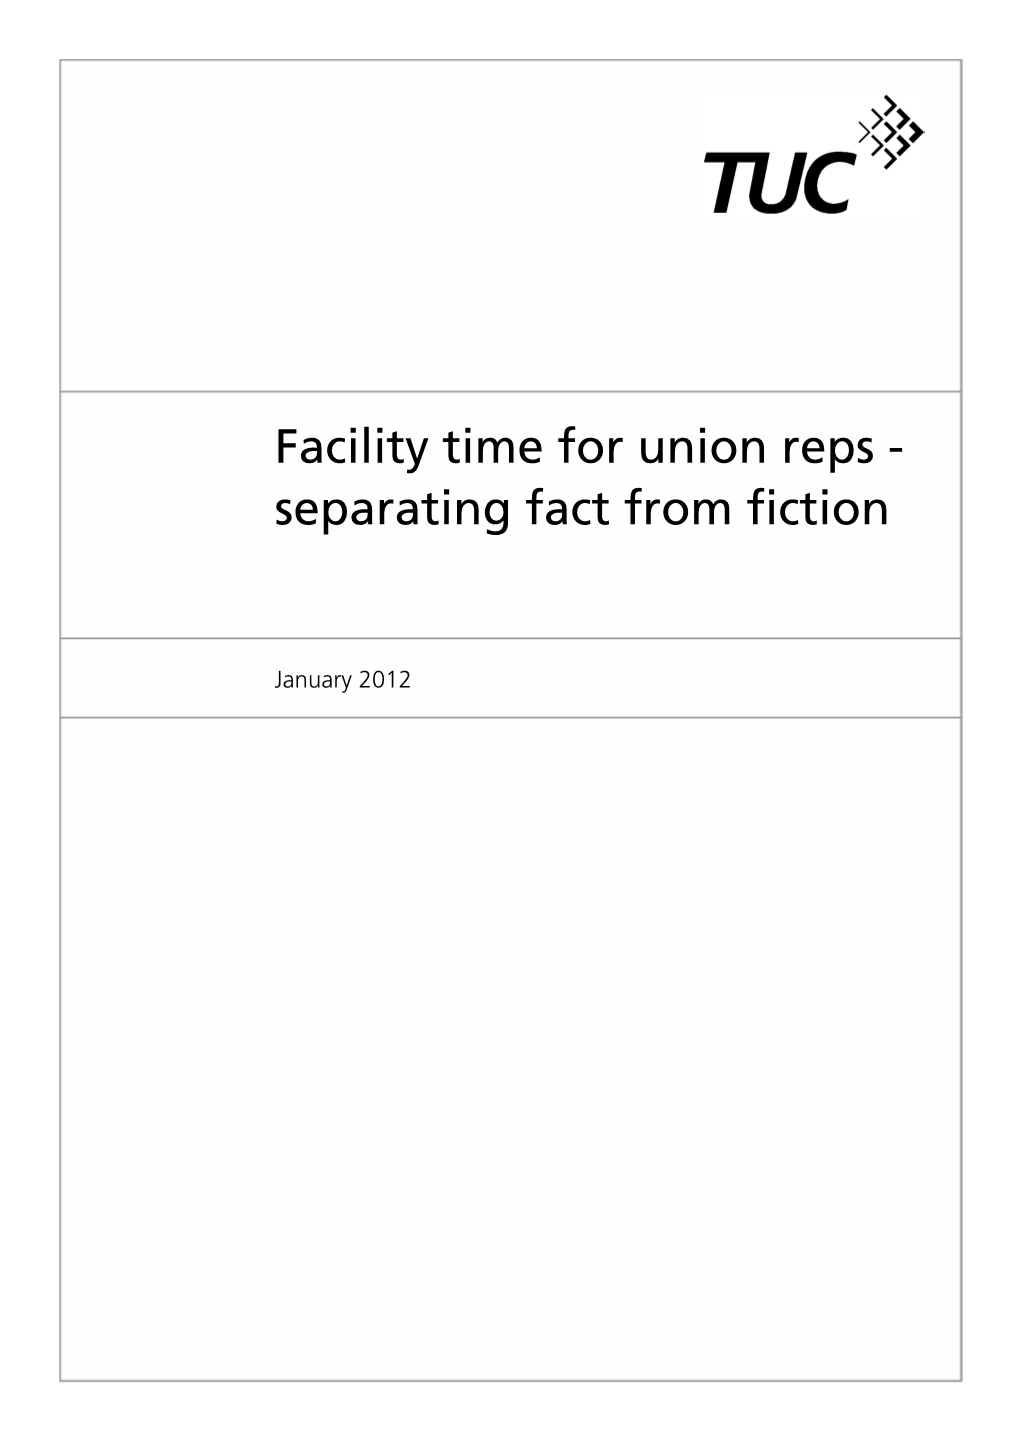 Facility Time for Union Reps - Separating Fact from Fiction